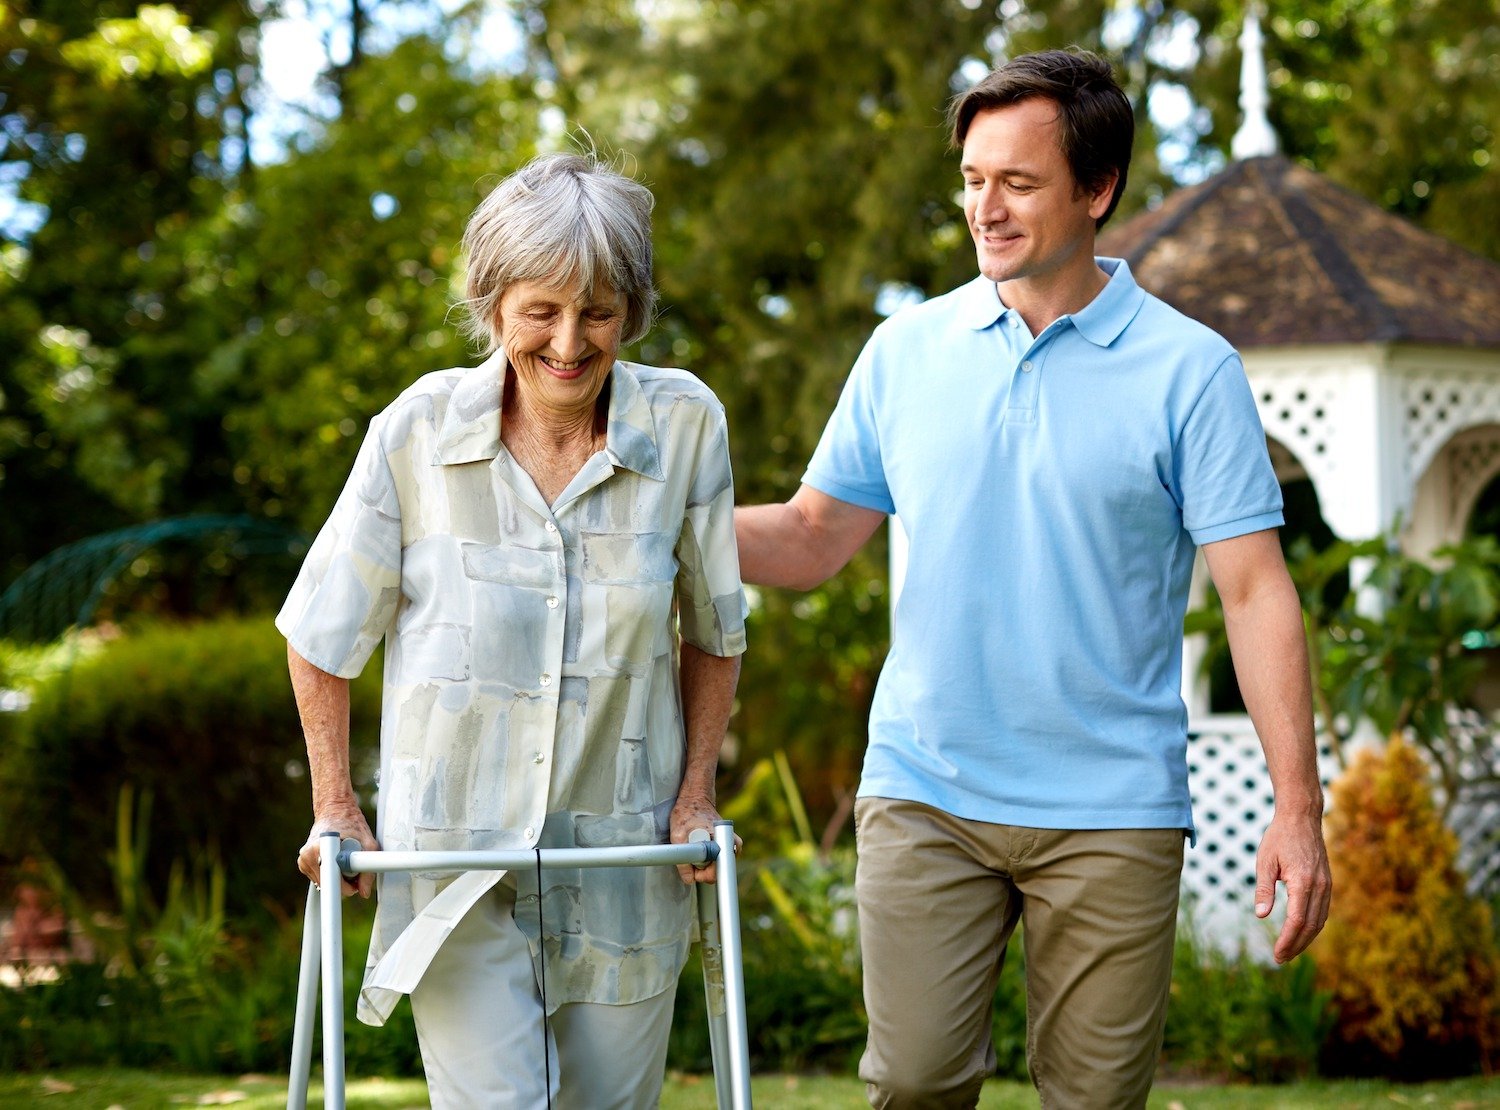 Staff member helping a woman with a walker in the garden